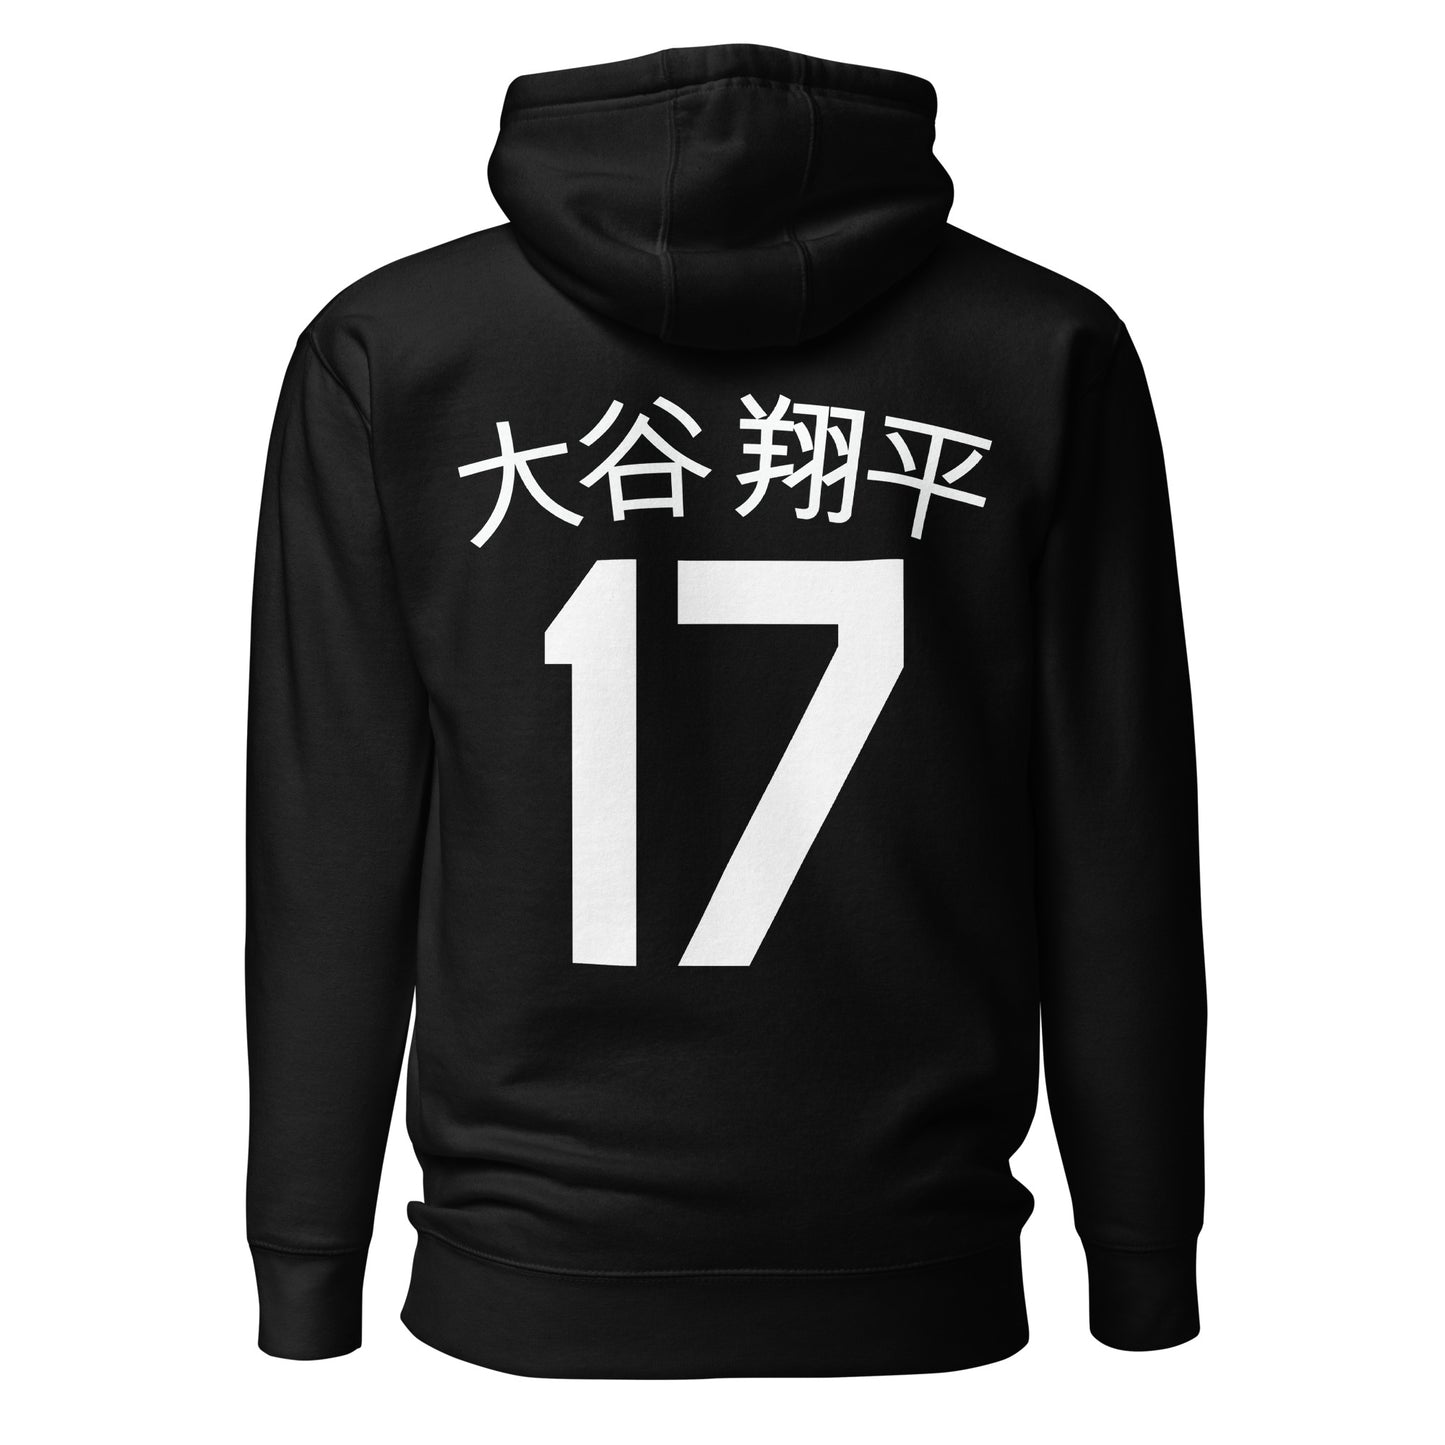 Shohei Ohtani in Japanese Pullover Hoodie